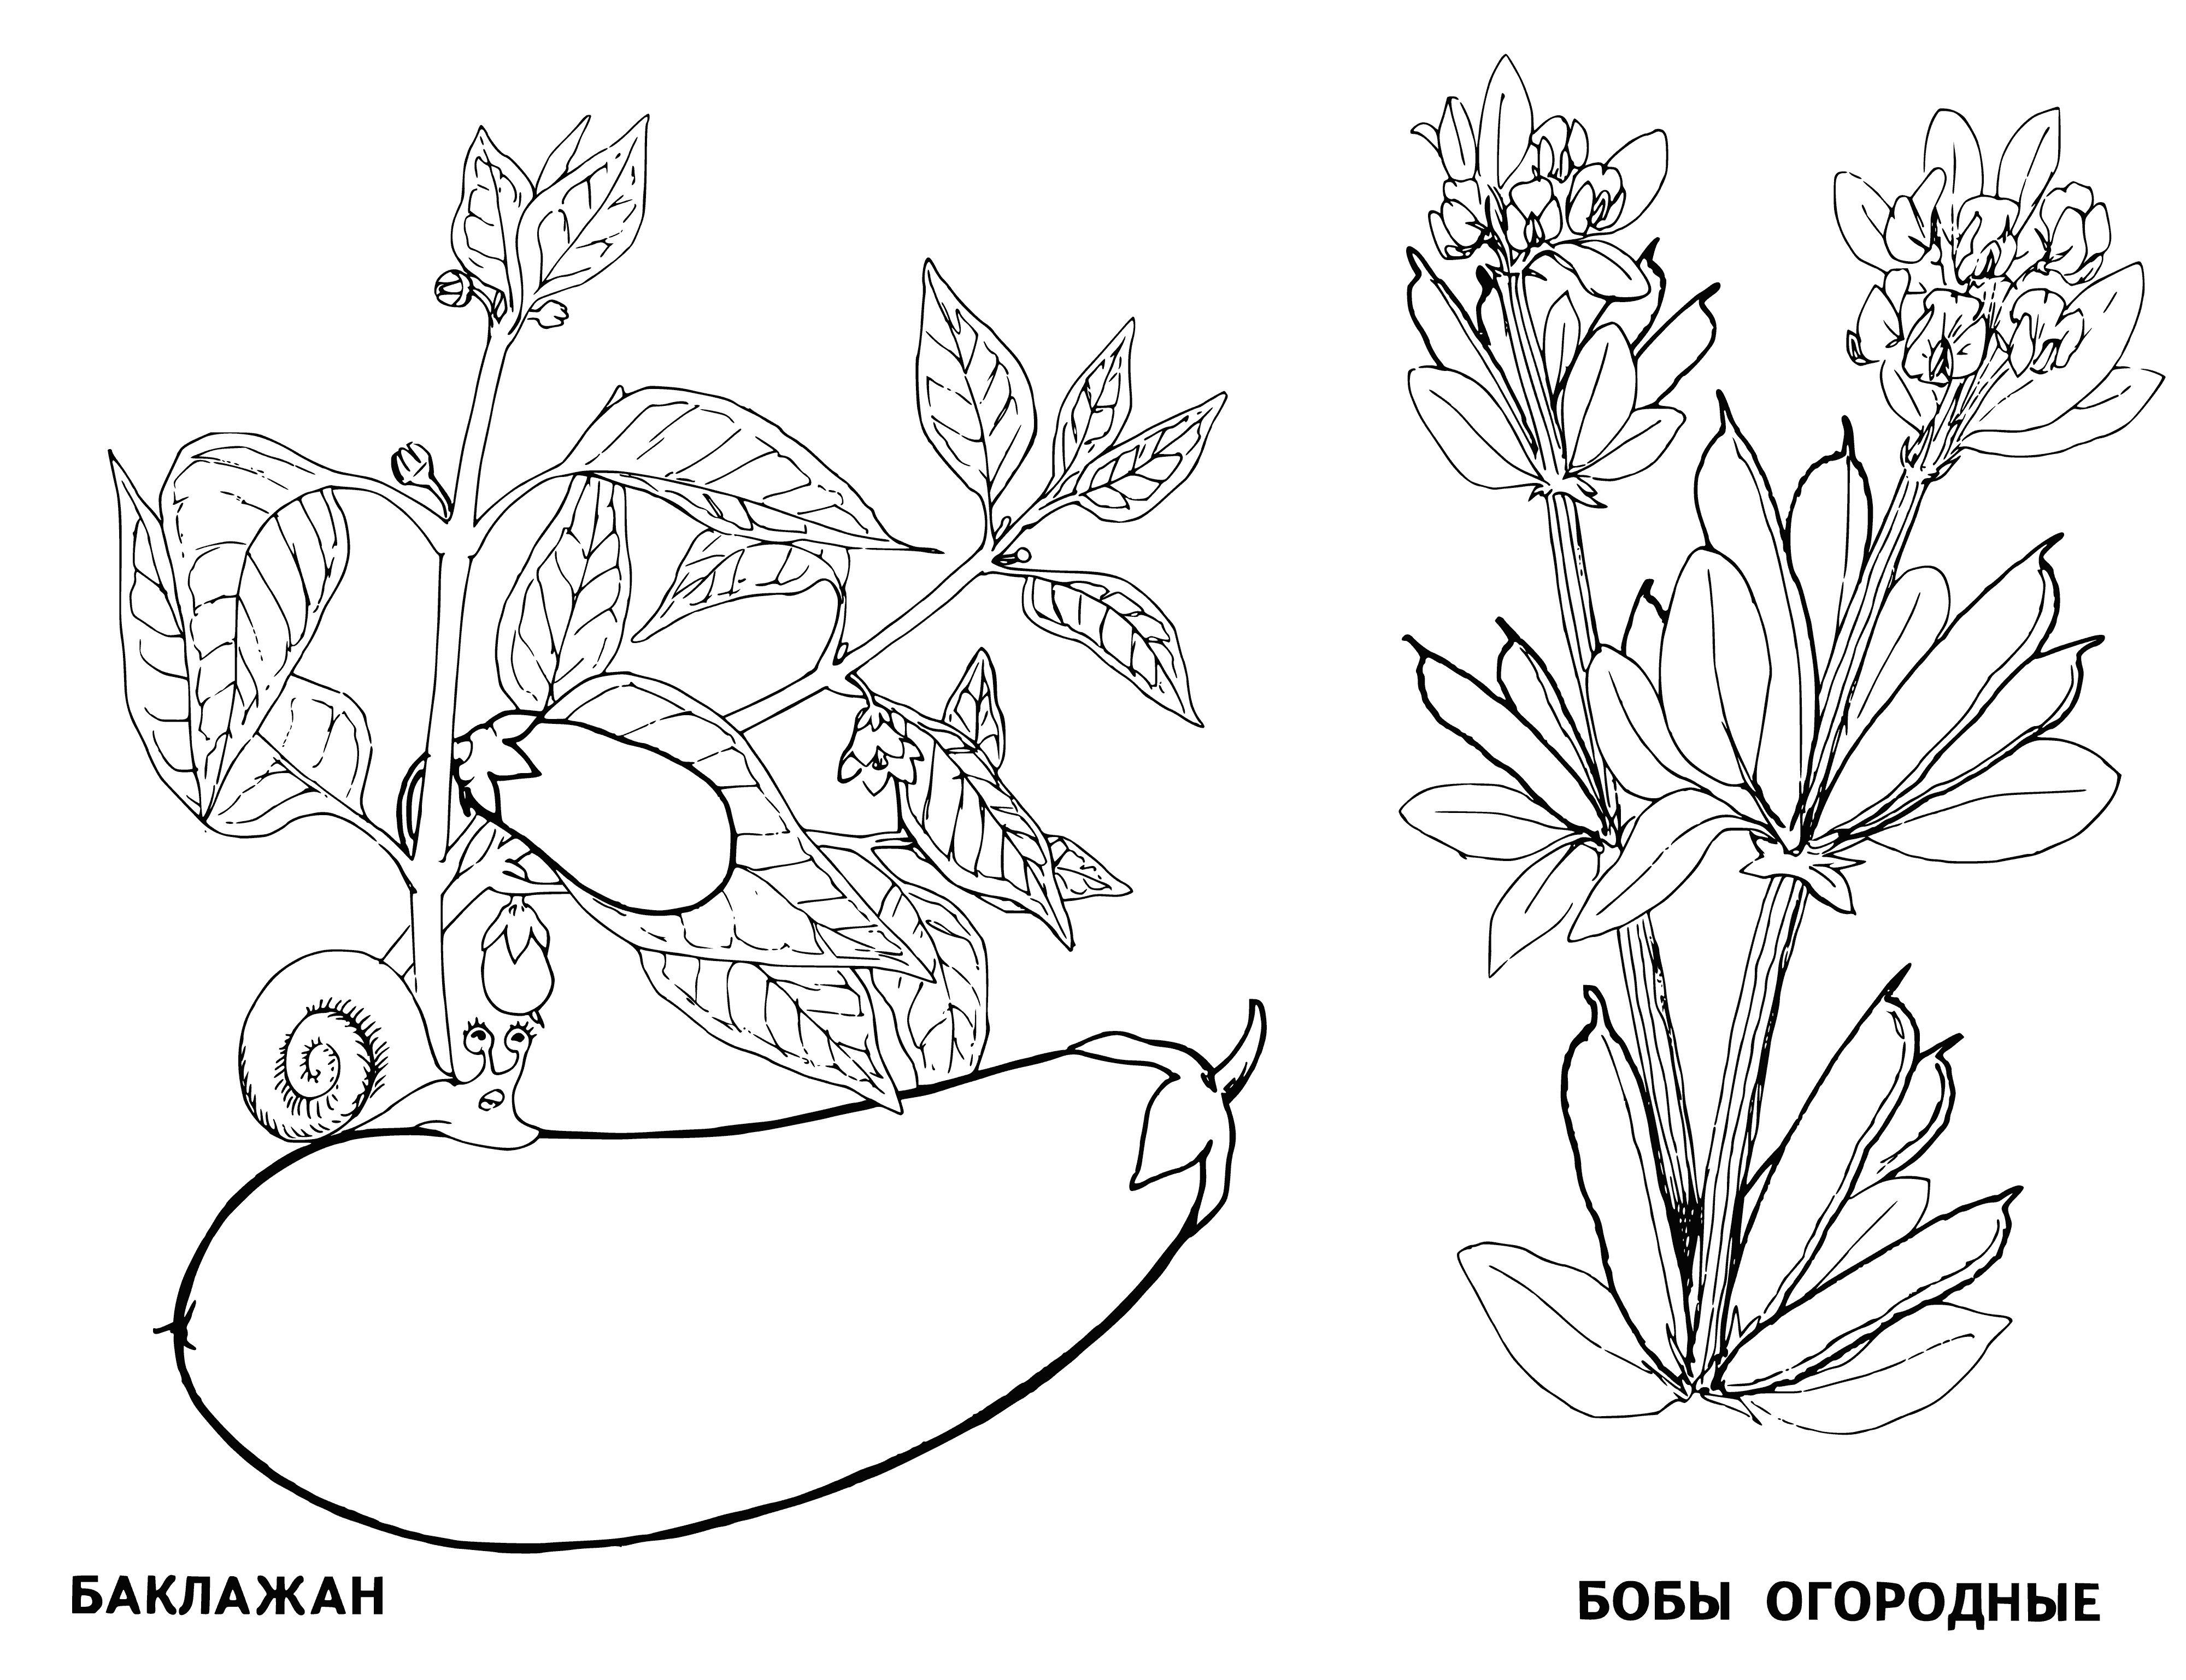 coloring page: Eggplant and beans: dark purple oblong, light green oval with bumps/smooth surface; eggplant on top.